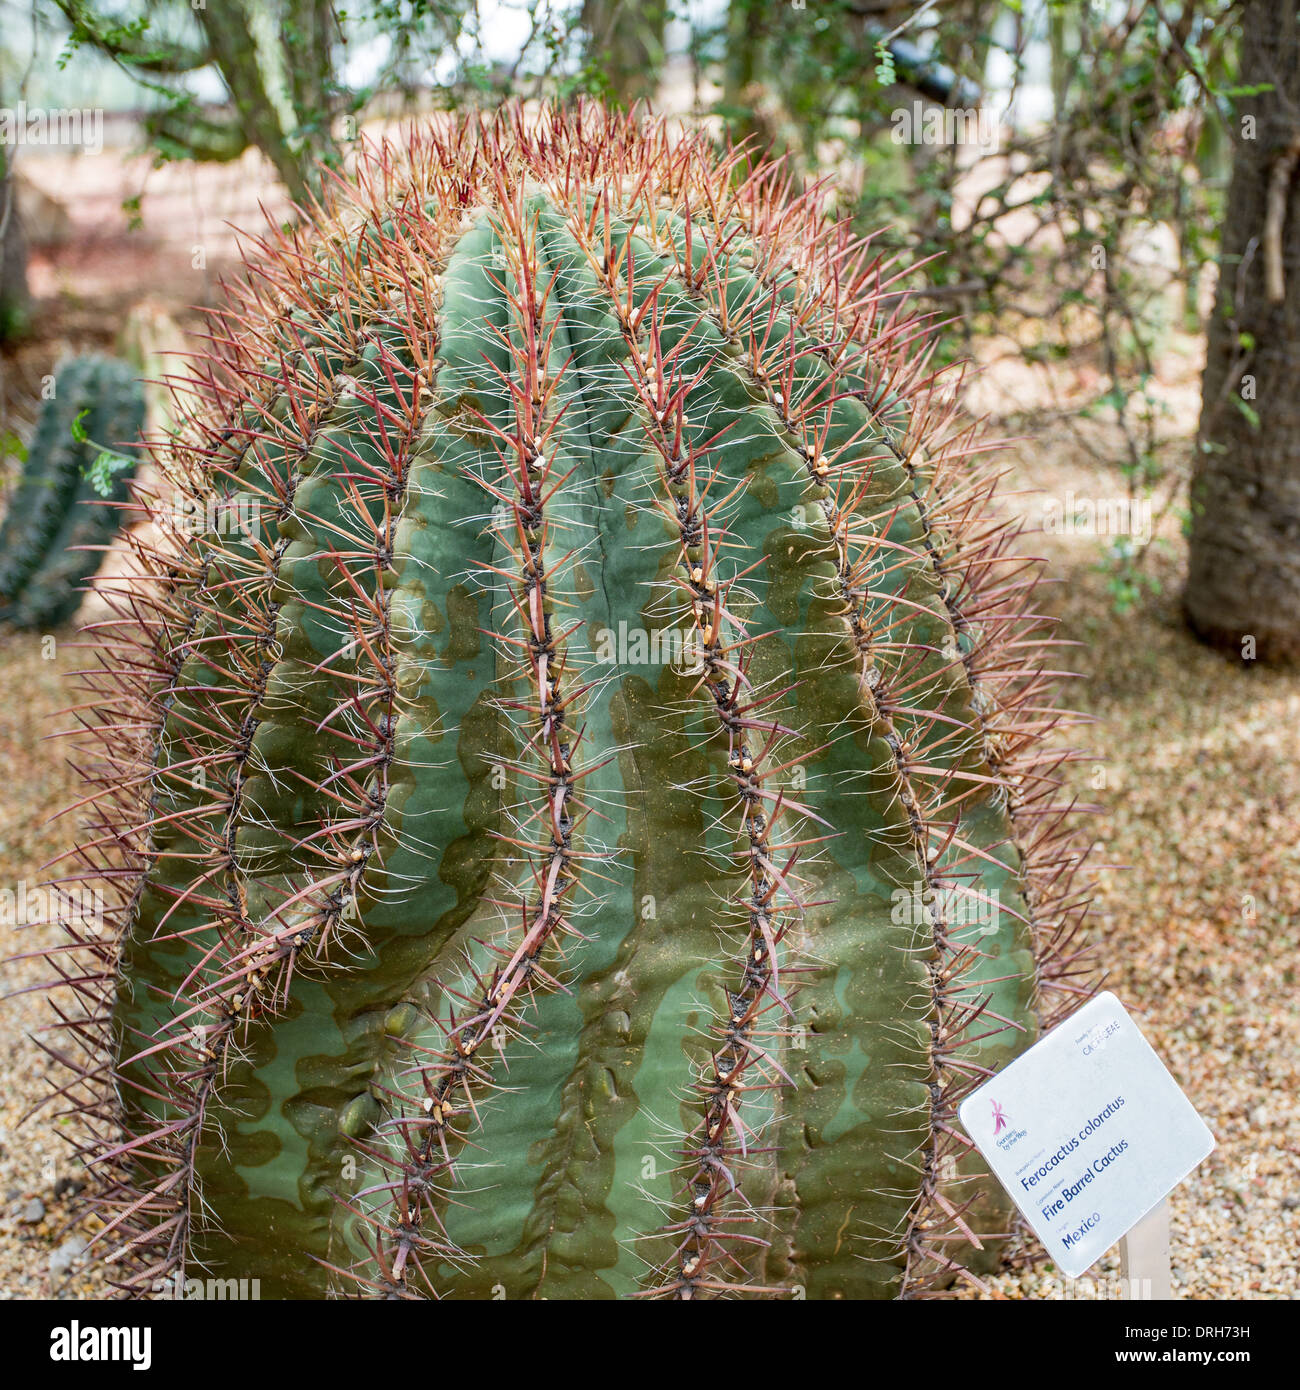 Ferocactus Coloratus, Fire Barrel Cactus, Flower Dome at Gardens by the Bay, Singapore Stock Photo